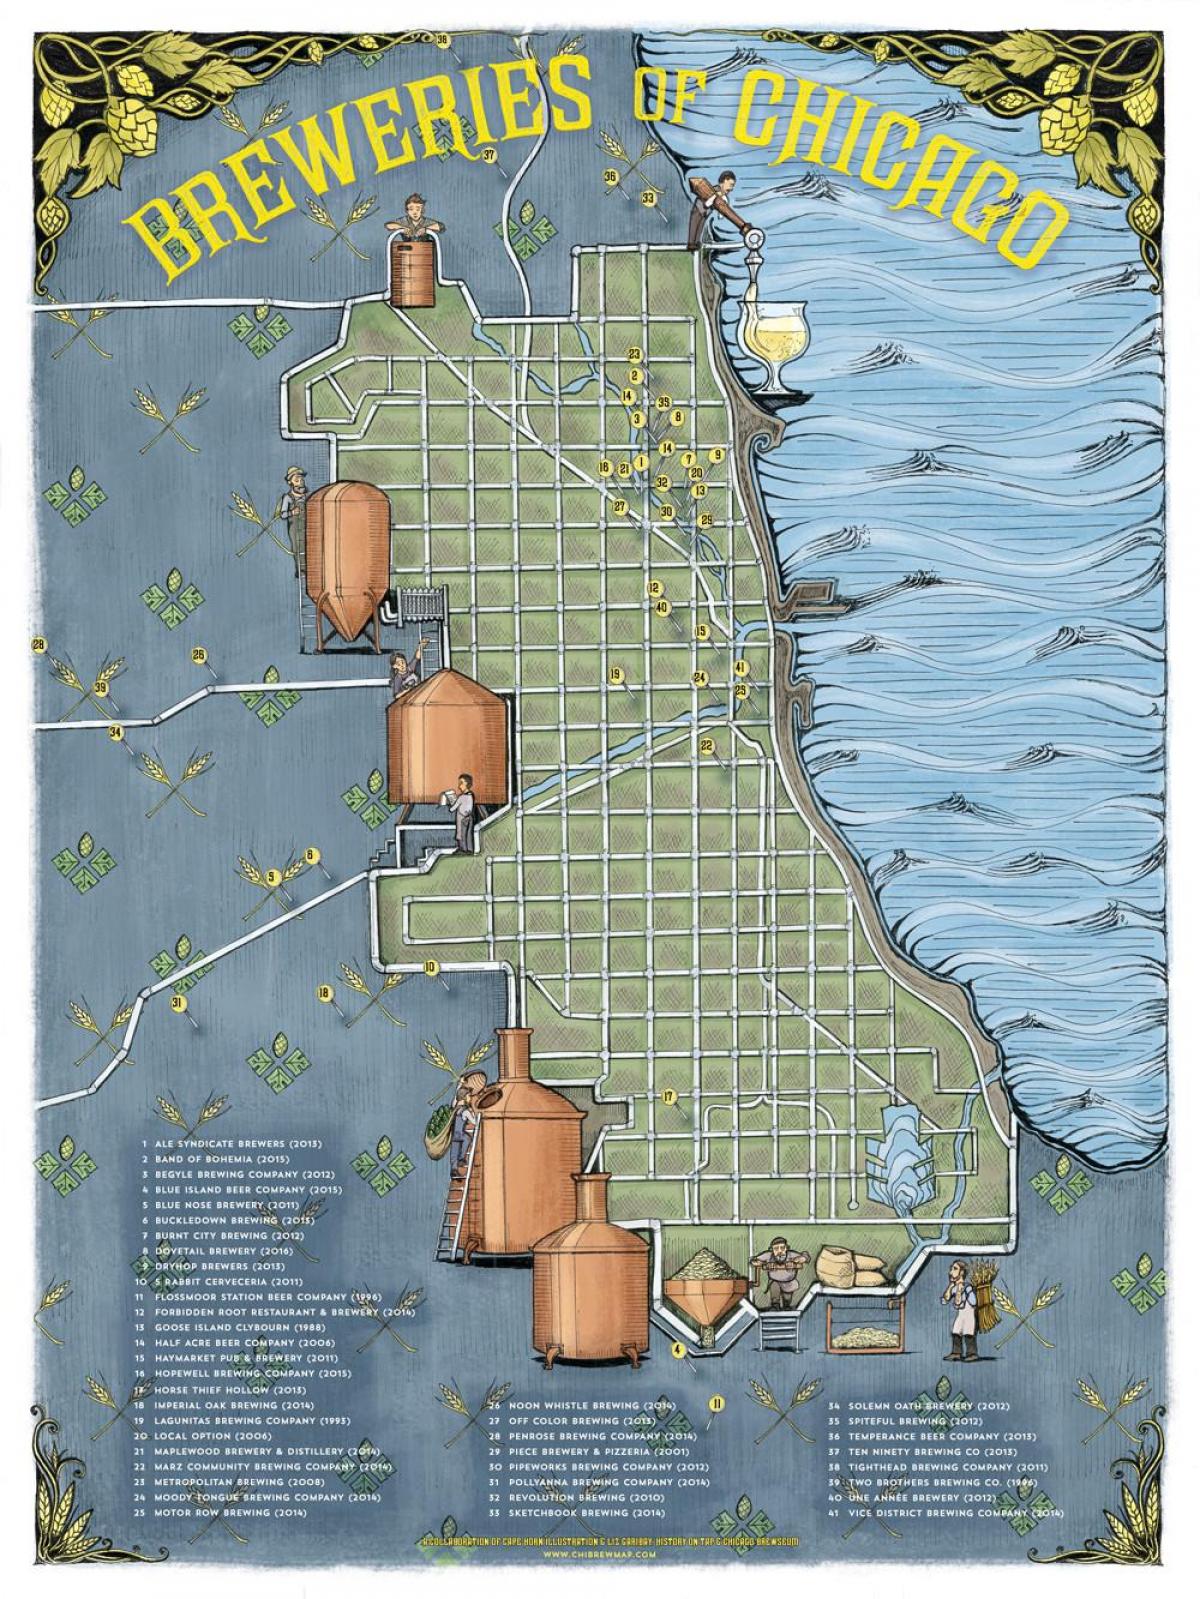 Chicago beer map